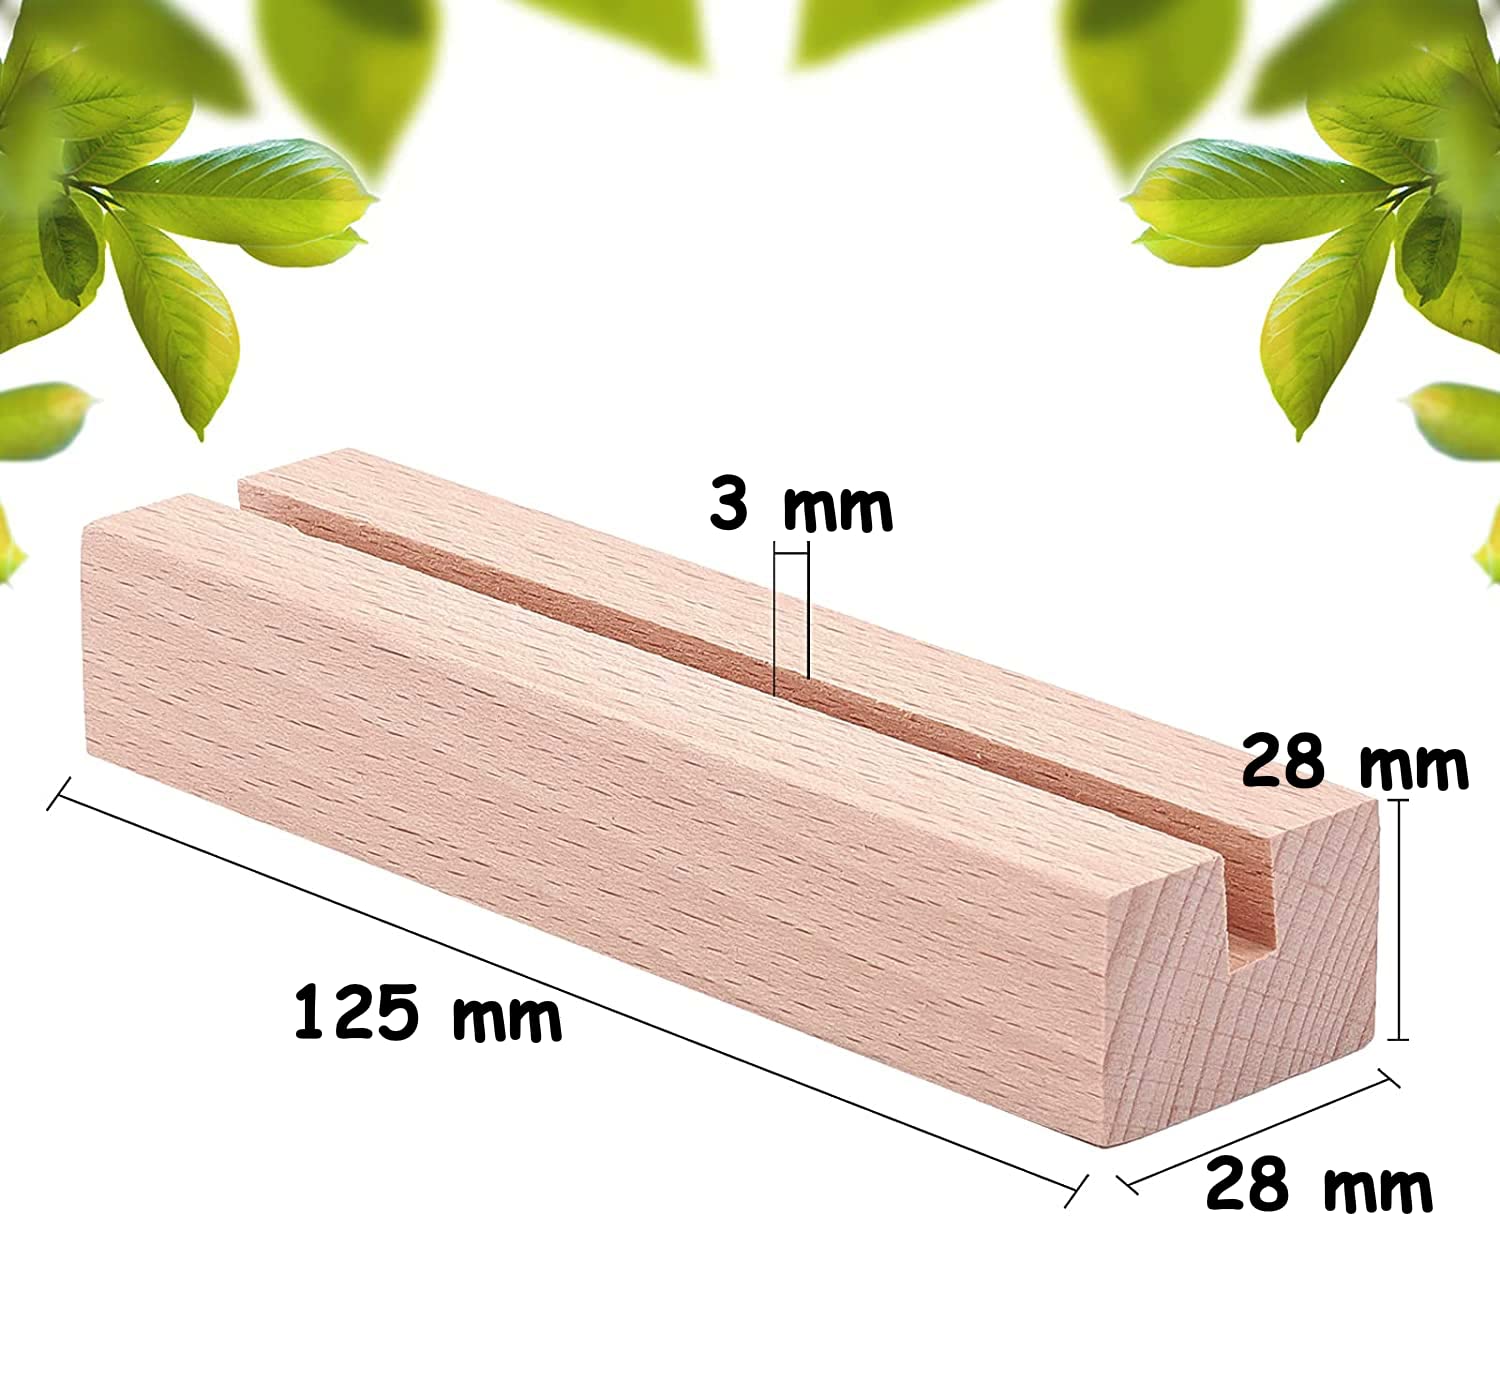 NJ Wood Card Holder Natural Beech Wood Table Number Holders, Wood Photo/picture Holders, Conference name card stand, buffet menu card holder, perfect for Hotel/home parties and conferences: 12 Pcs Set